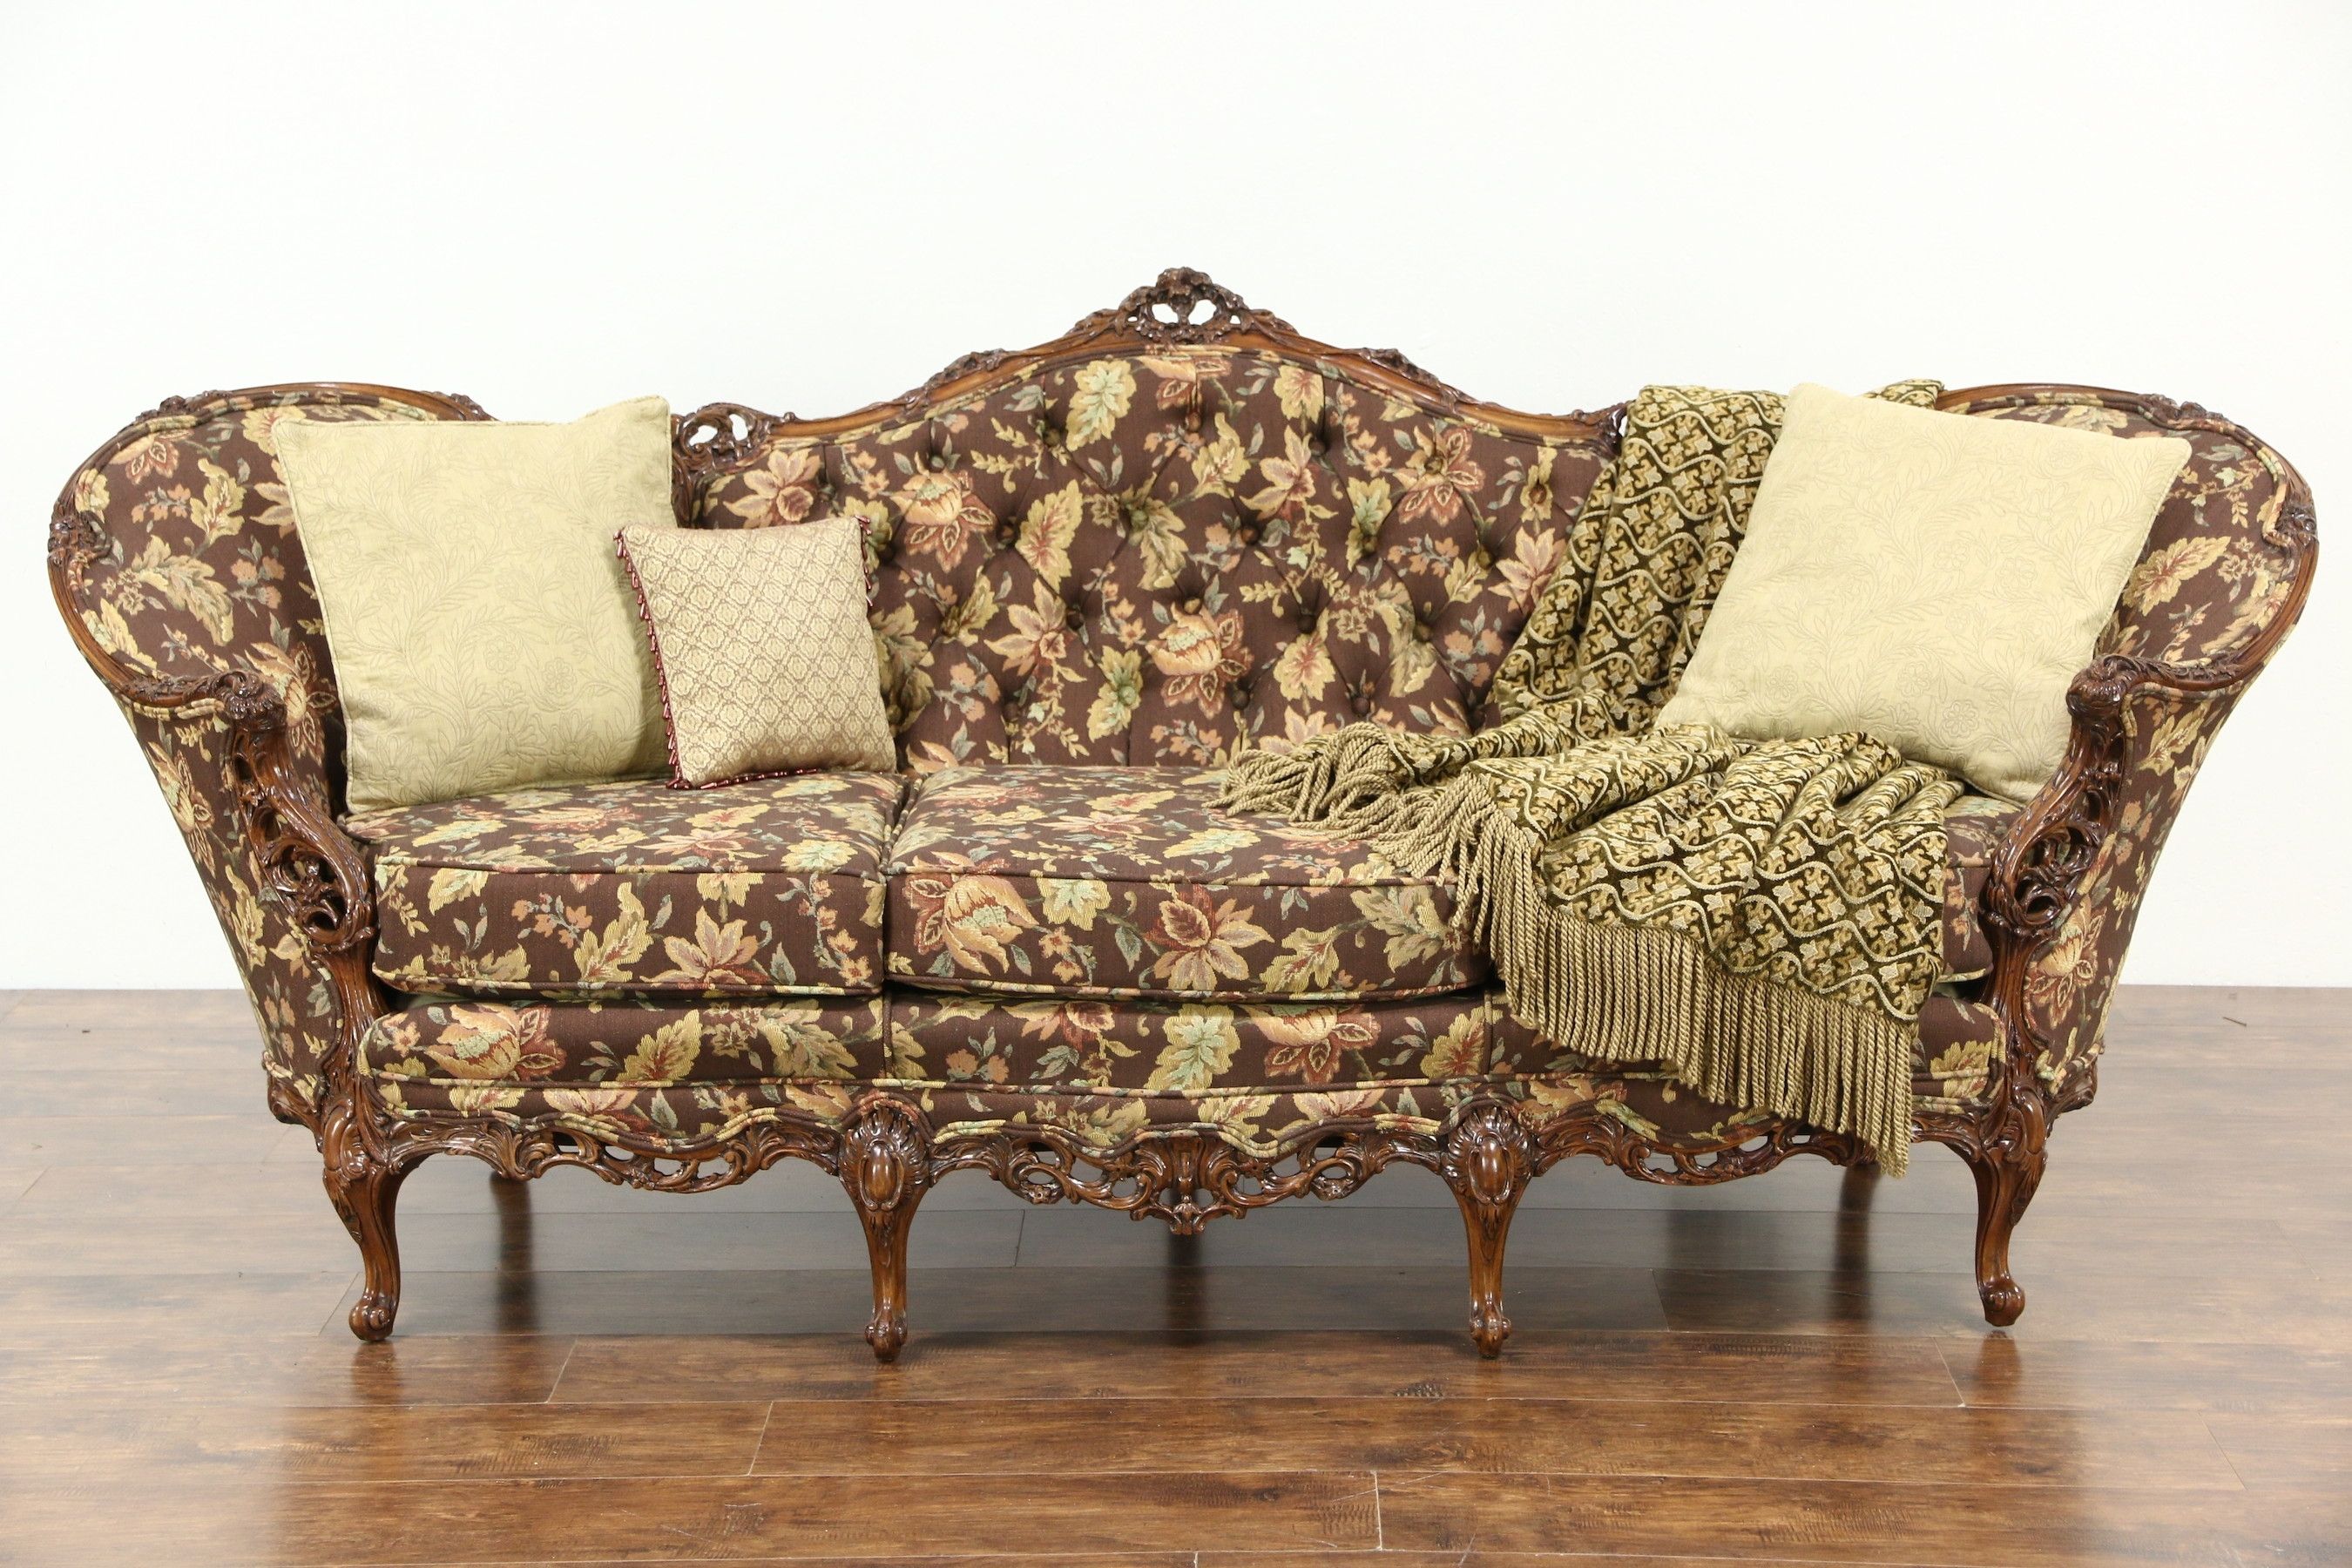 Good Vintage Sofas 85 For Sofa Table Ideas With Vintage Sofas In Vintage Sofas (View 1 of 10)